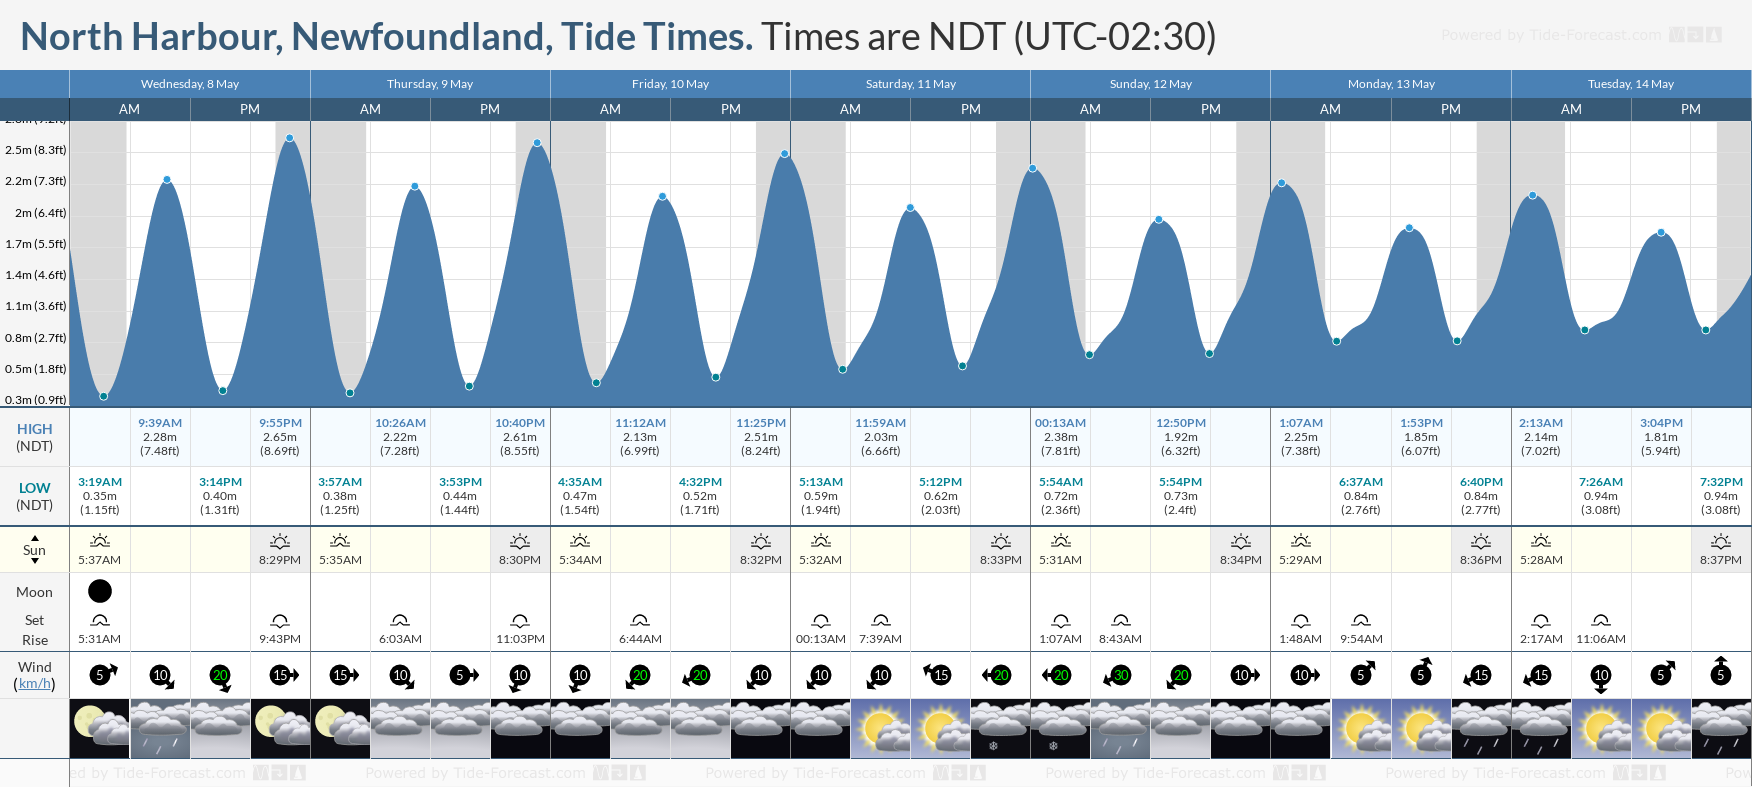 North Harbour, Newfoundland Tide Chart including high and low tide tide times for the next 7 days